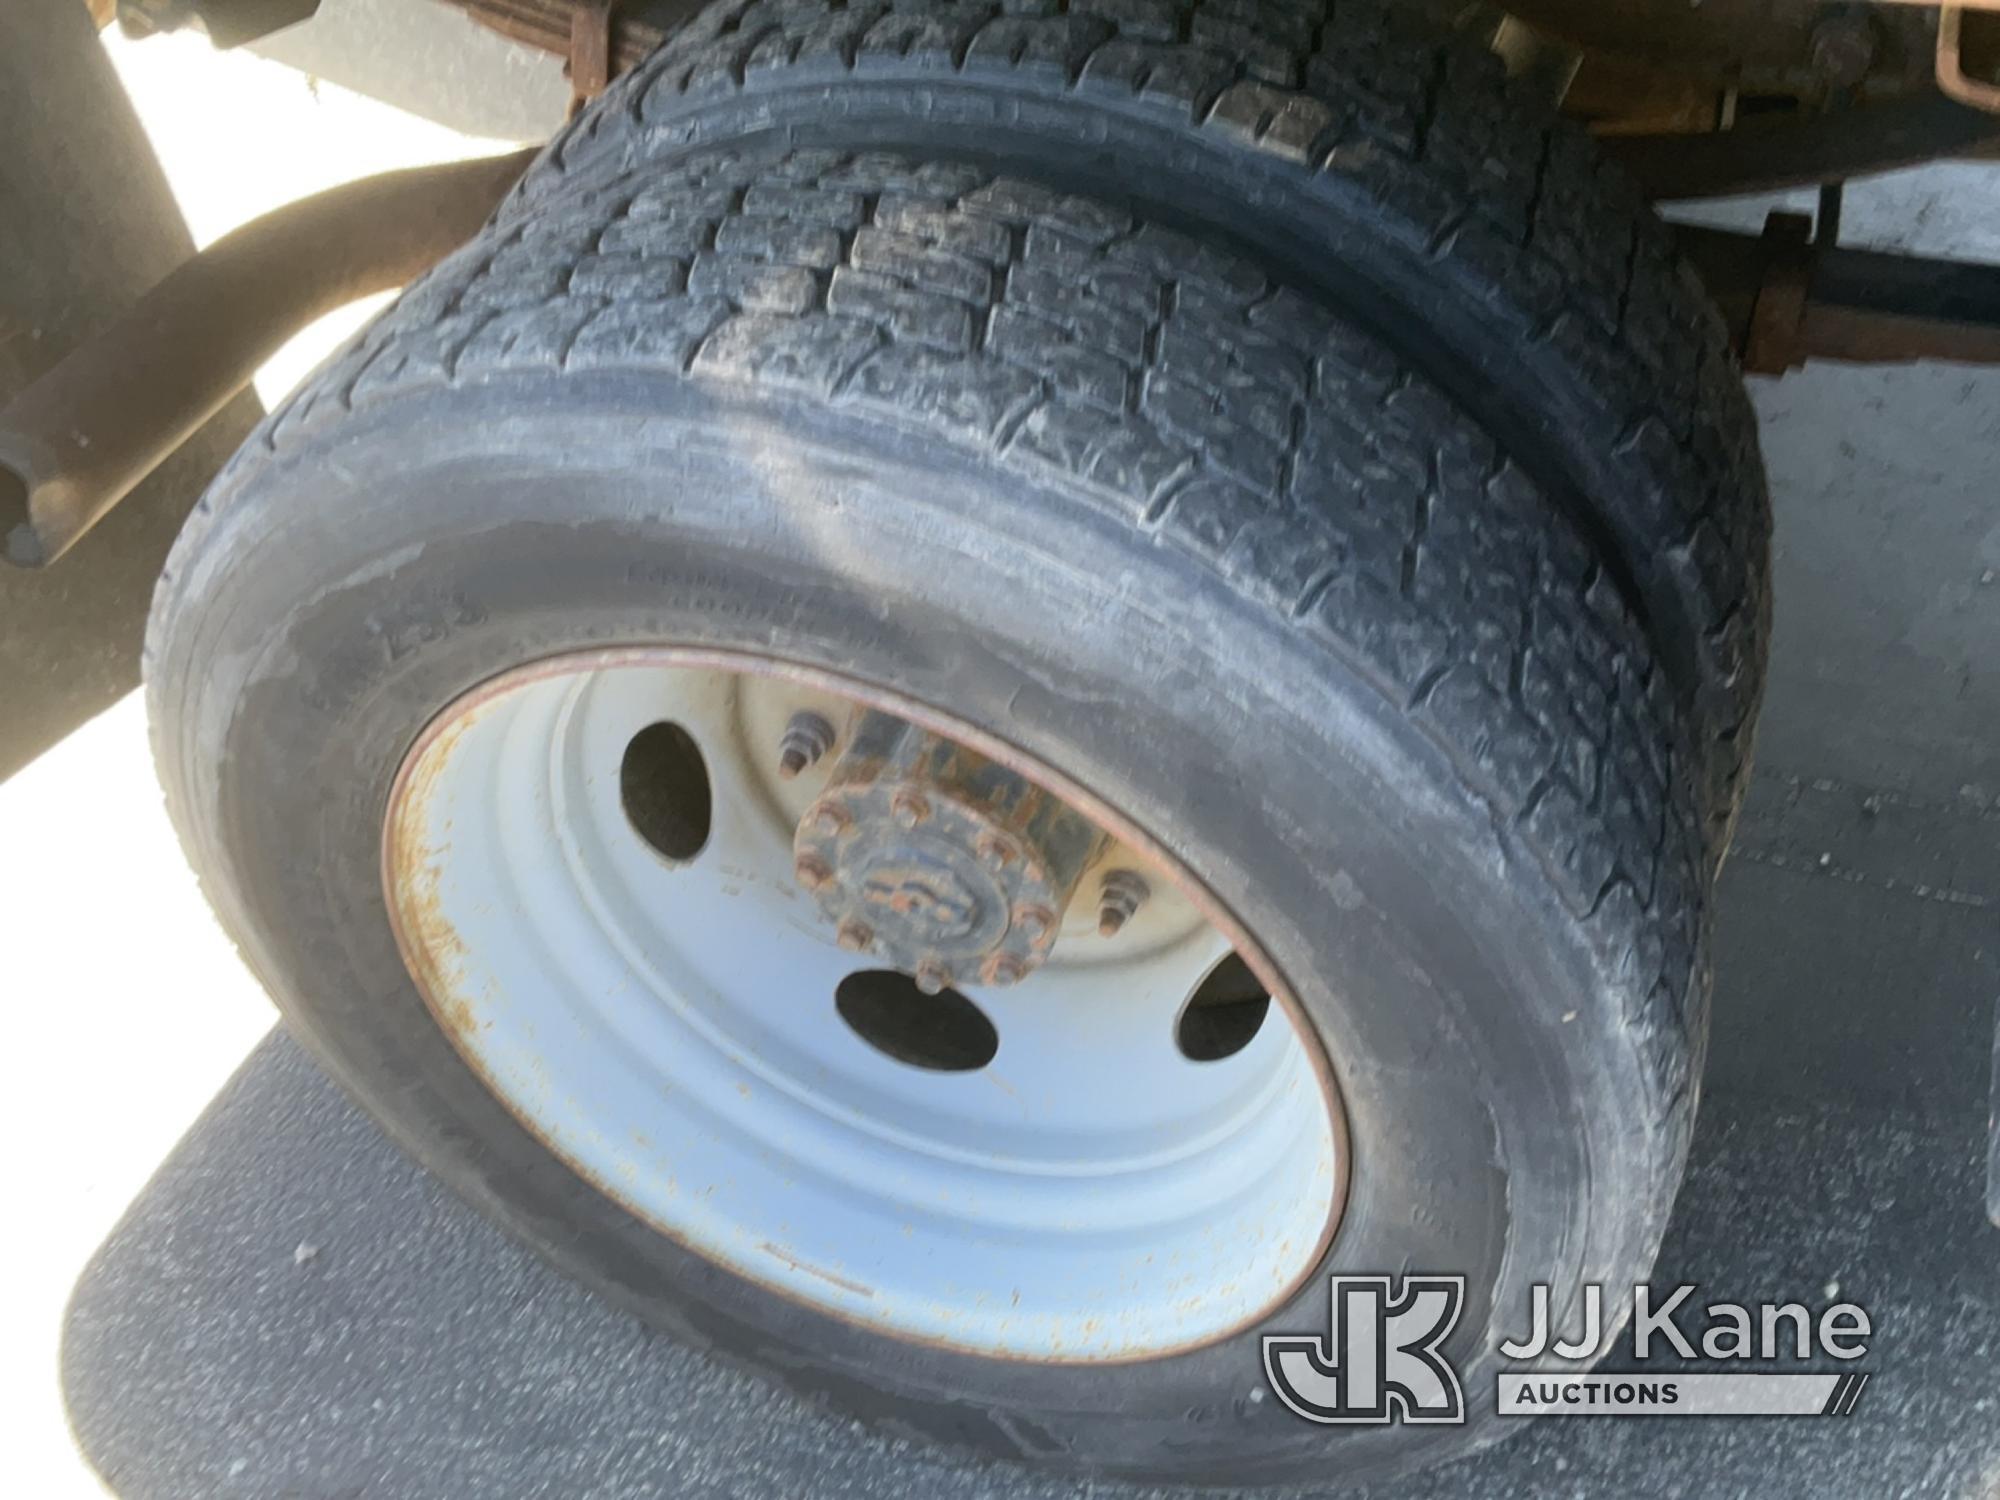 (Salt Lake City, UT) 1999 Ford F450 Chipper Dump Truck Not Running, Condition Unknown, No Batteries